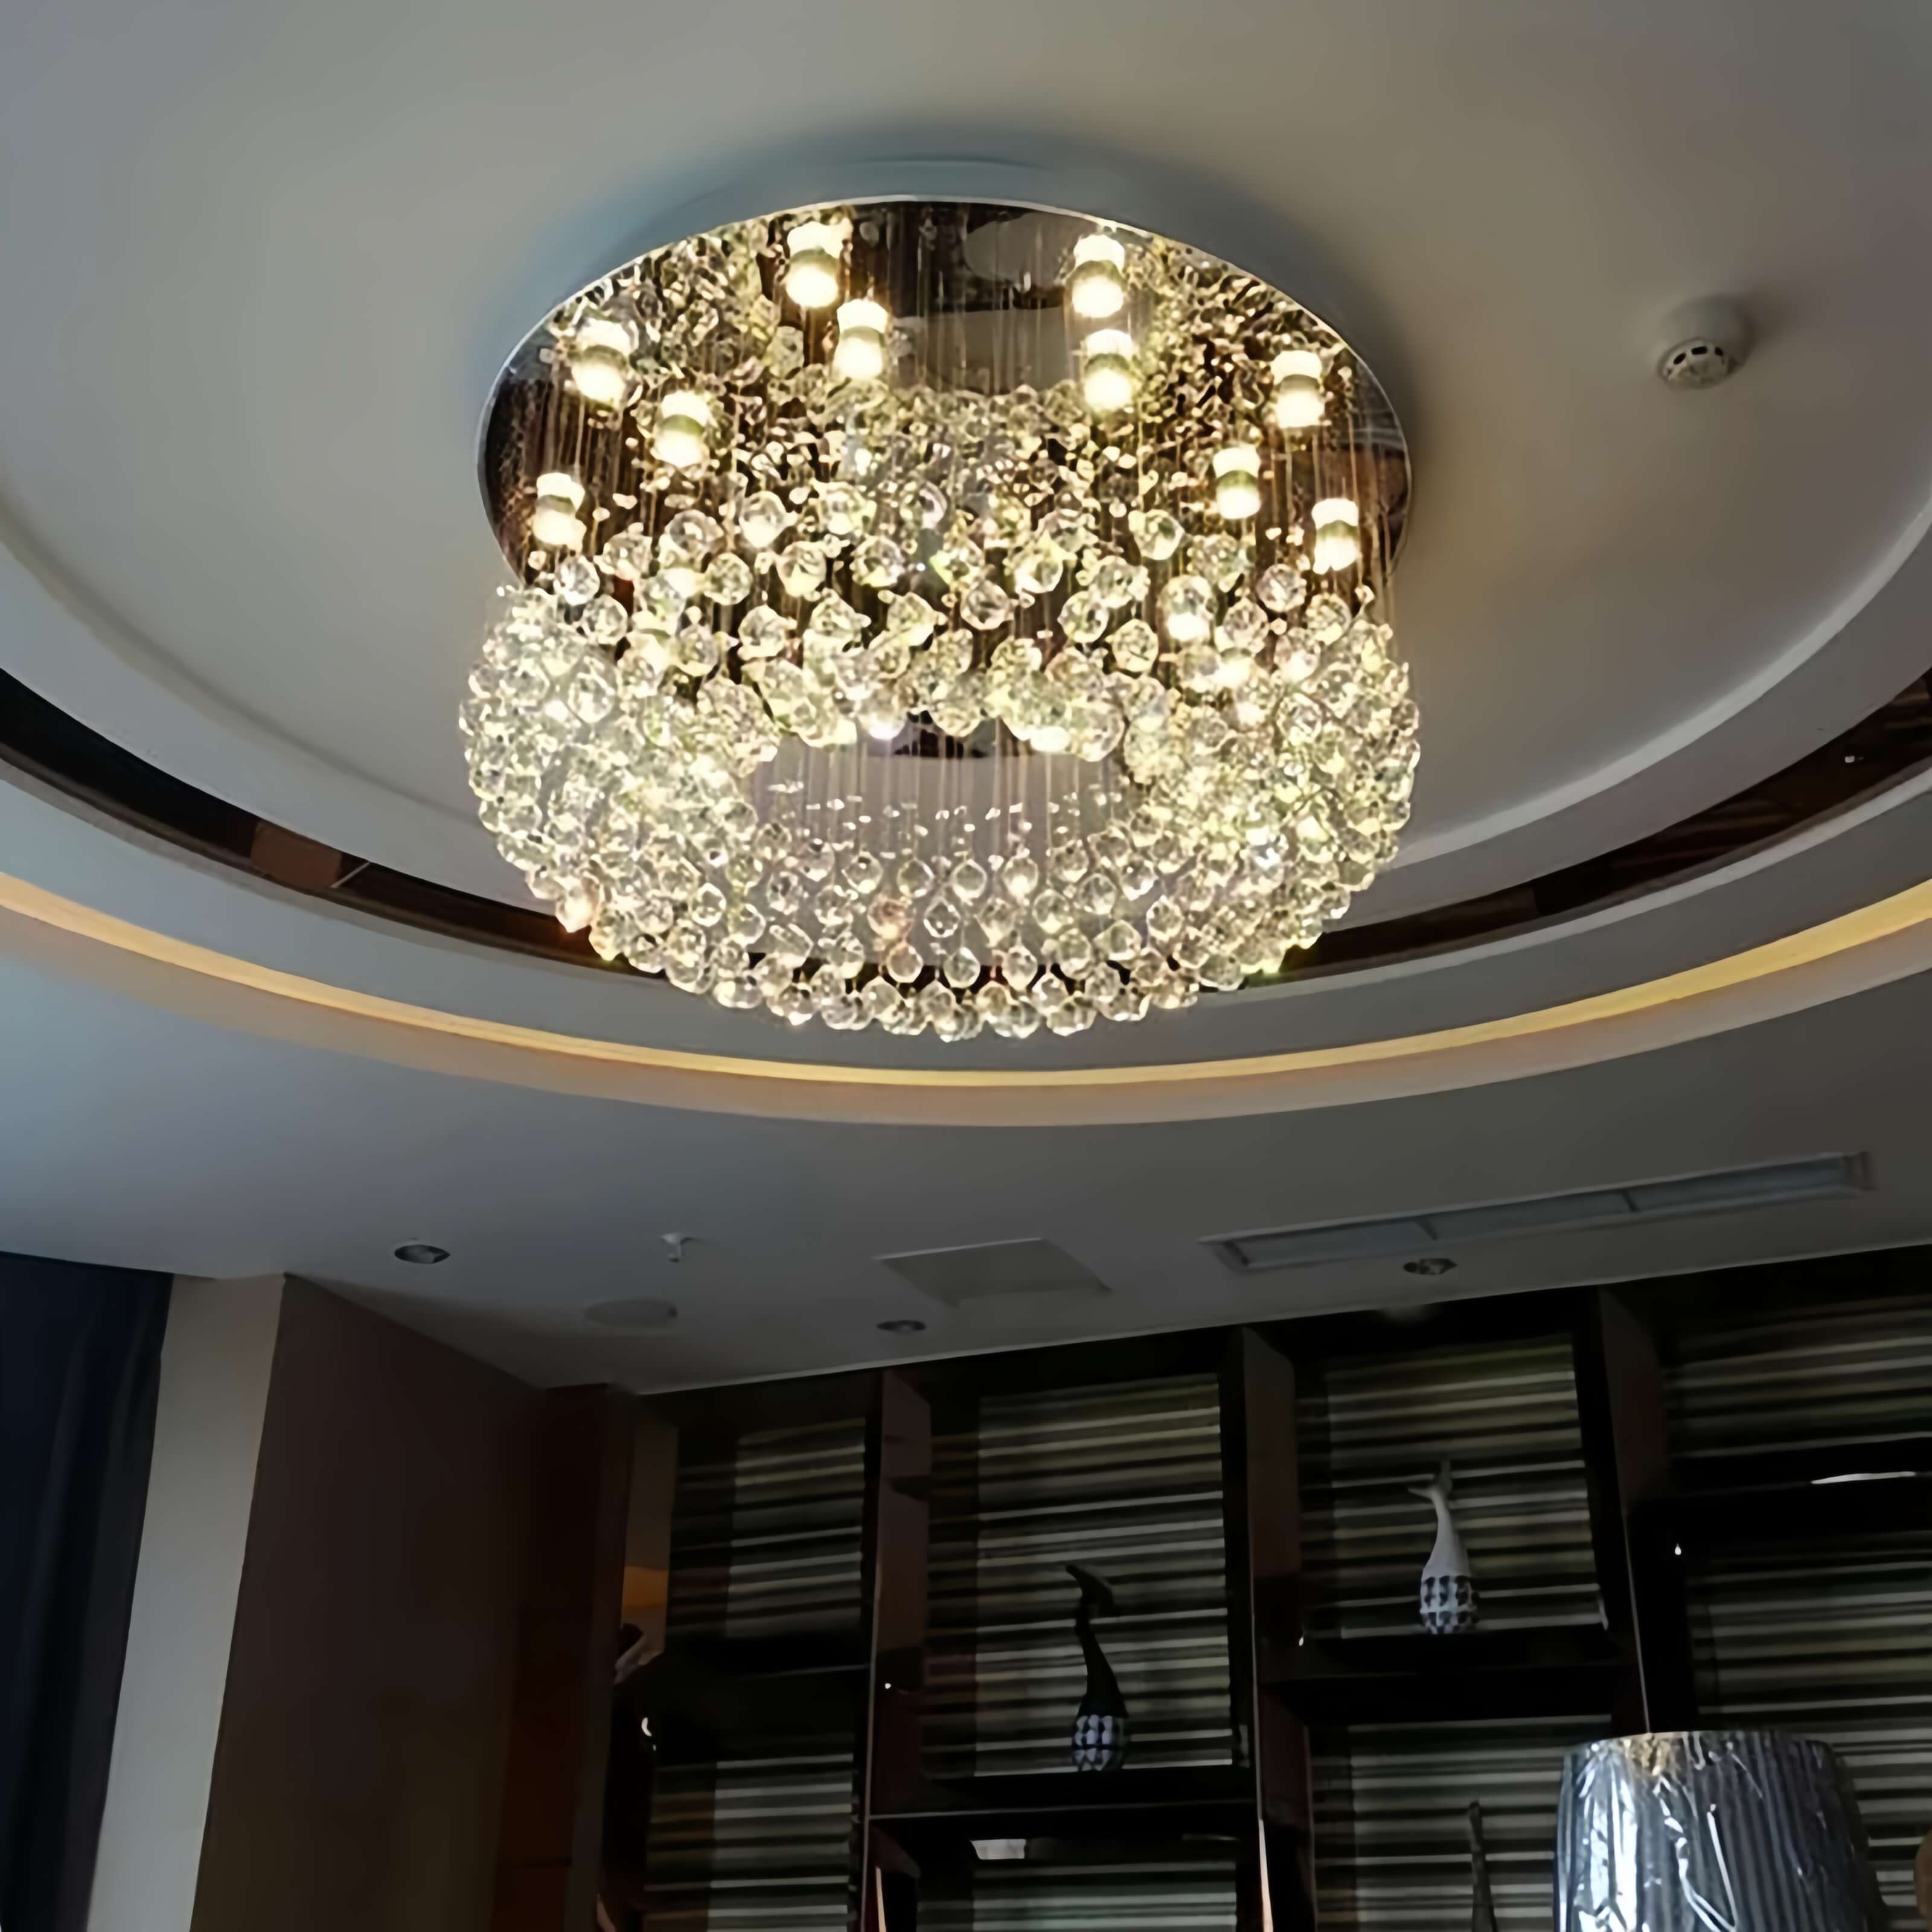 Petal Shape Raindrop Crystal Chandelier - Ceiling Light with Round Base